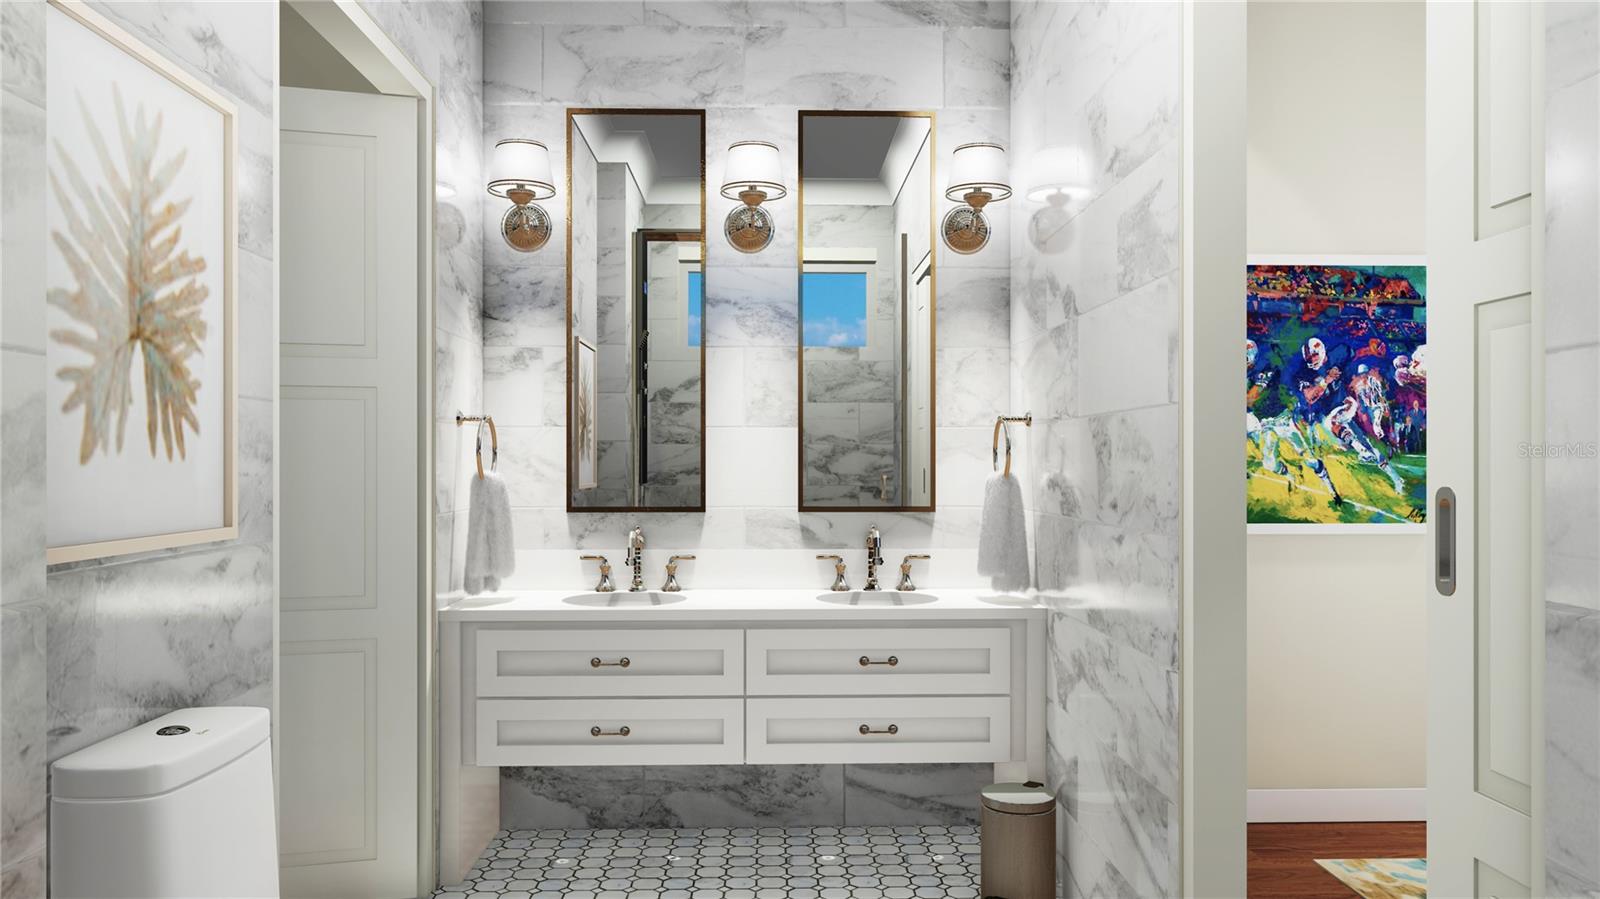 Even the guest bathrooms that are adjacent to the bedrooms have double sinks!  Digital rendering.